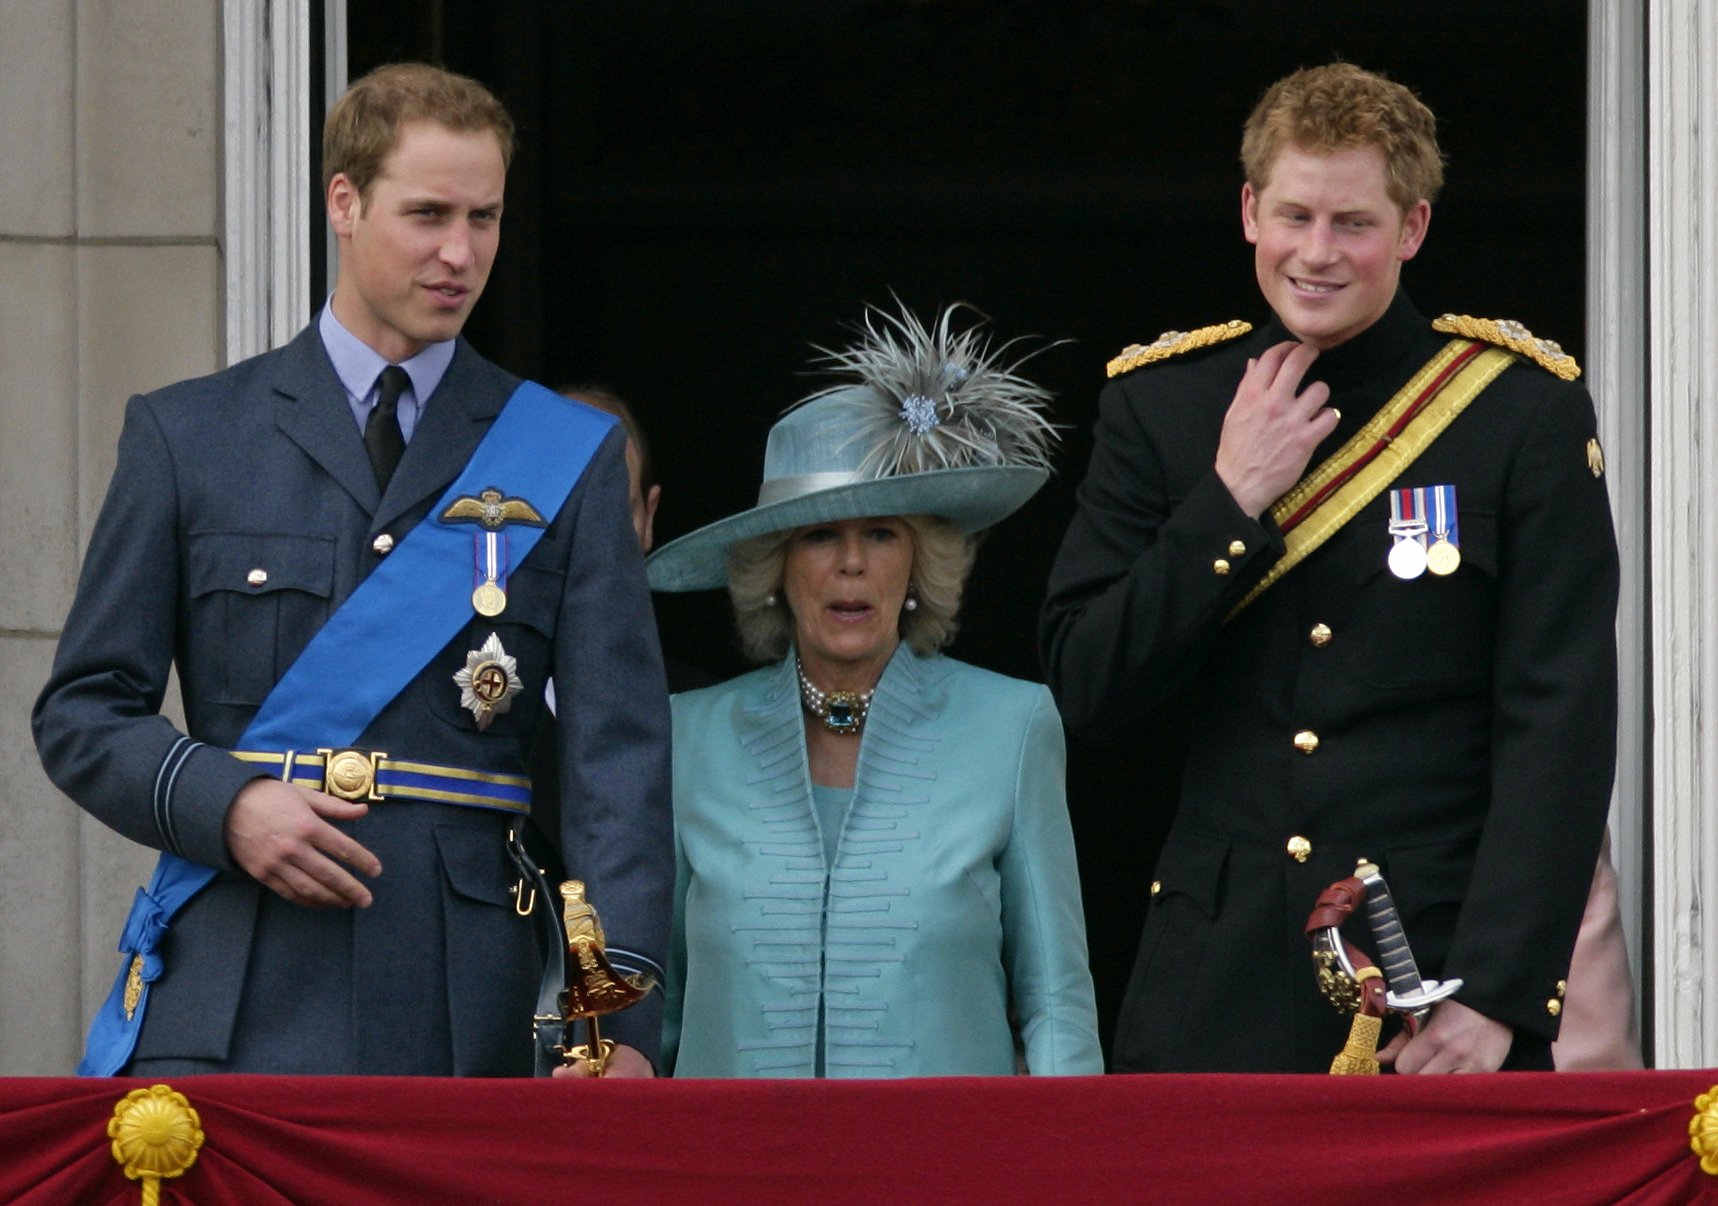 Prince William, Camilla Duchess of Cornwall and Prince Harry on the balcony of Buckingham Palace during the annual event of the Queens Colour of First Battalion Grenadier Guards on June 13, 2009 in London, England. | Source: Getty Images